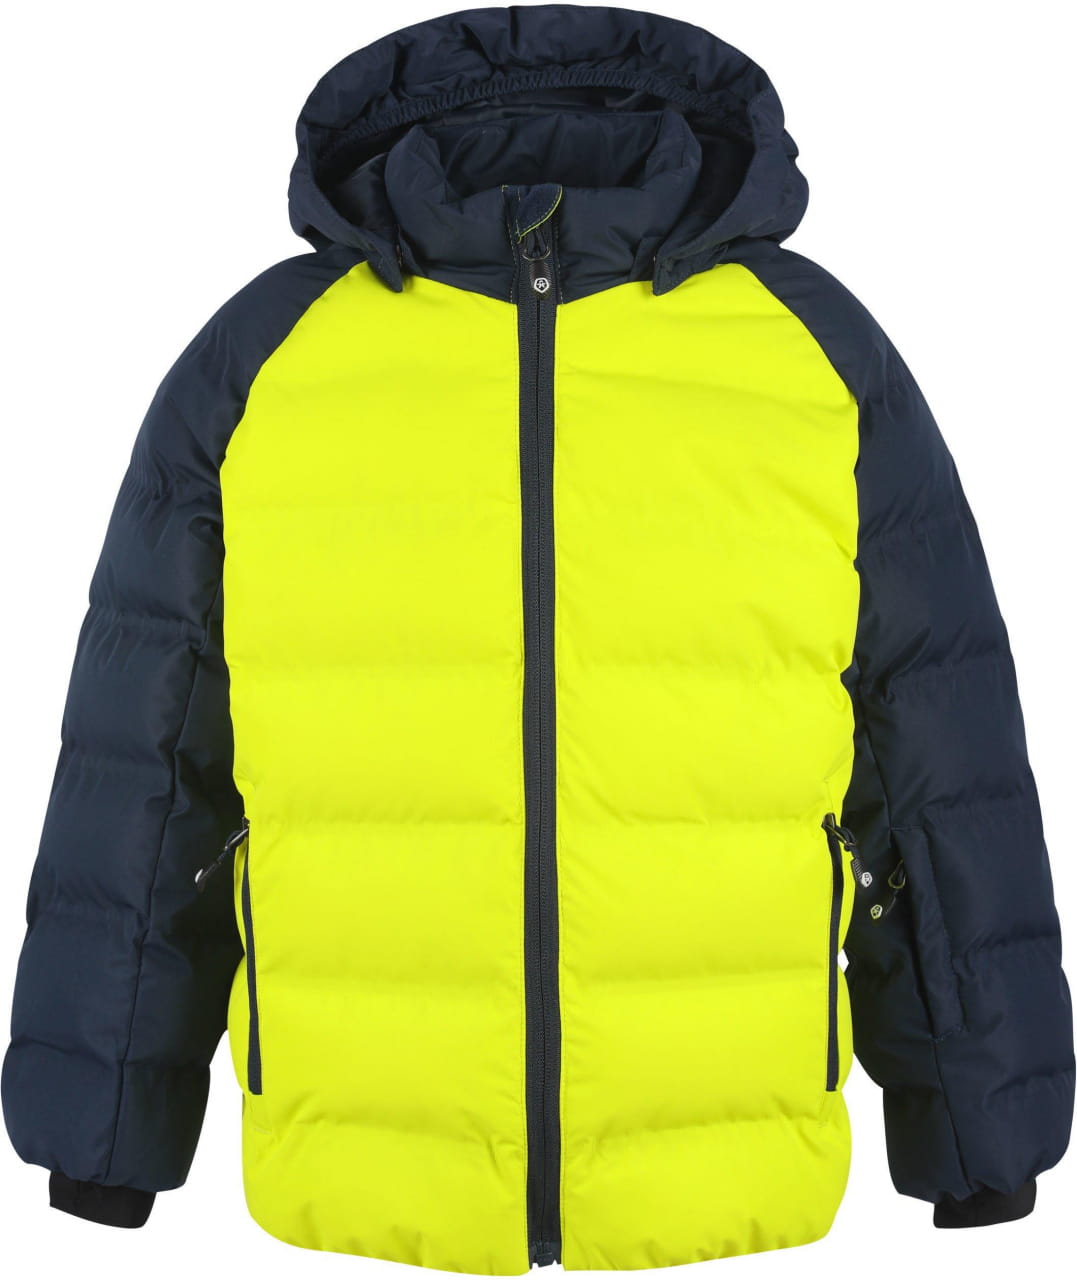 Giacca invernale per bambini Color Kids Ski Jacket Quilted